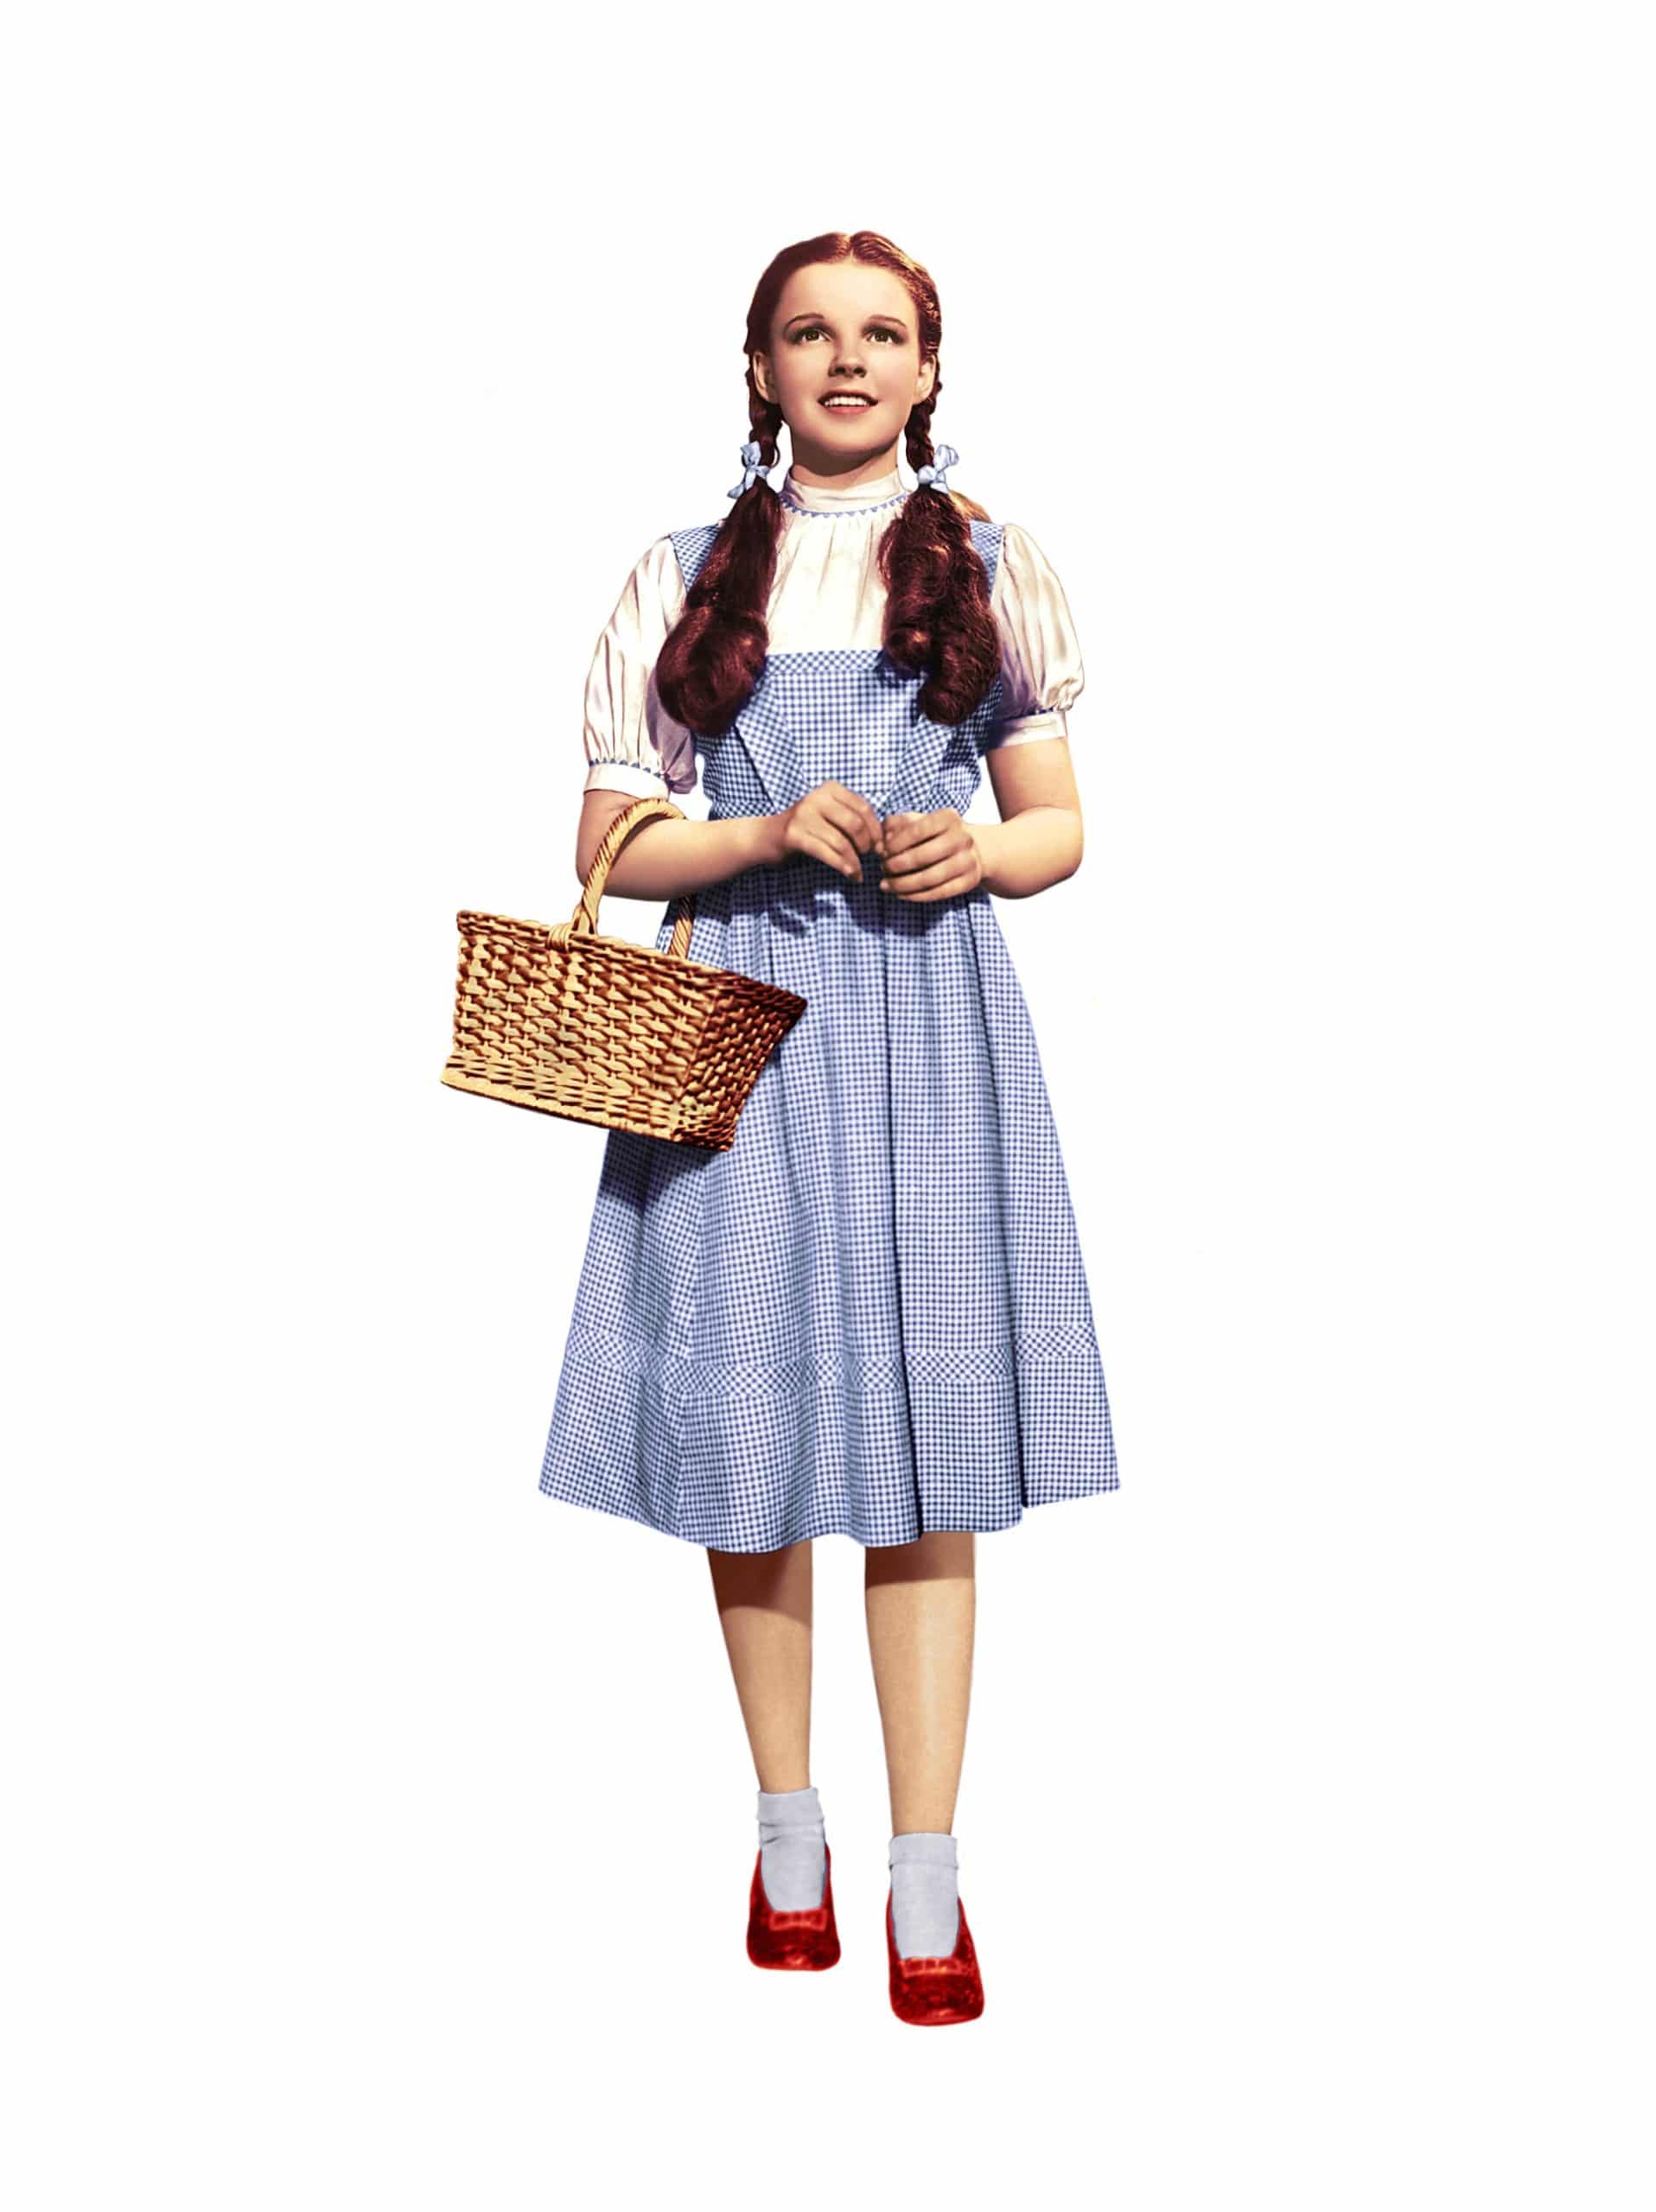 THE WIZARD OF OZ, Judy Garland as 'Dorothy' 1939